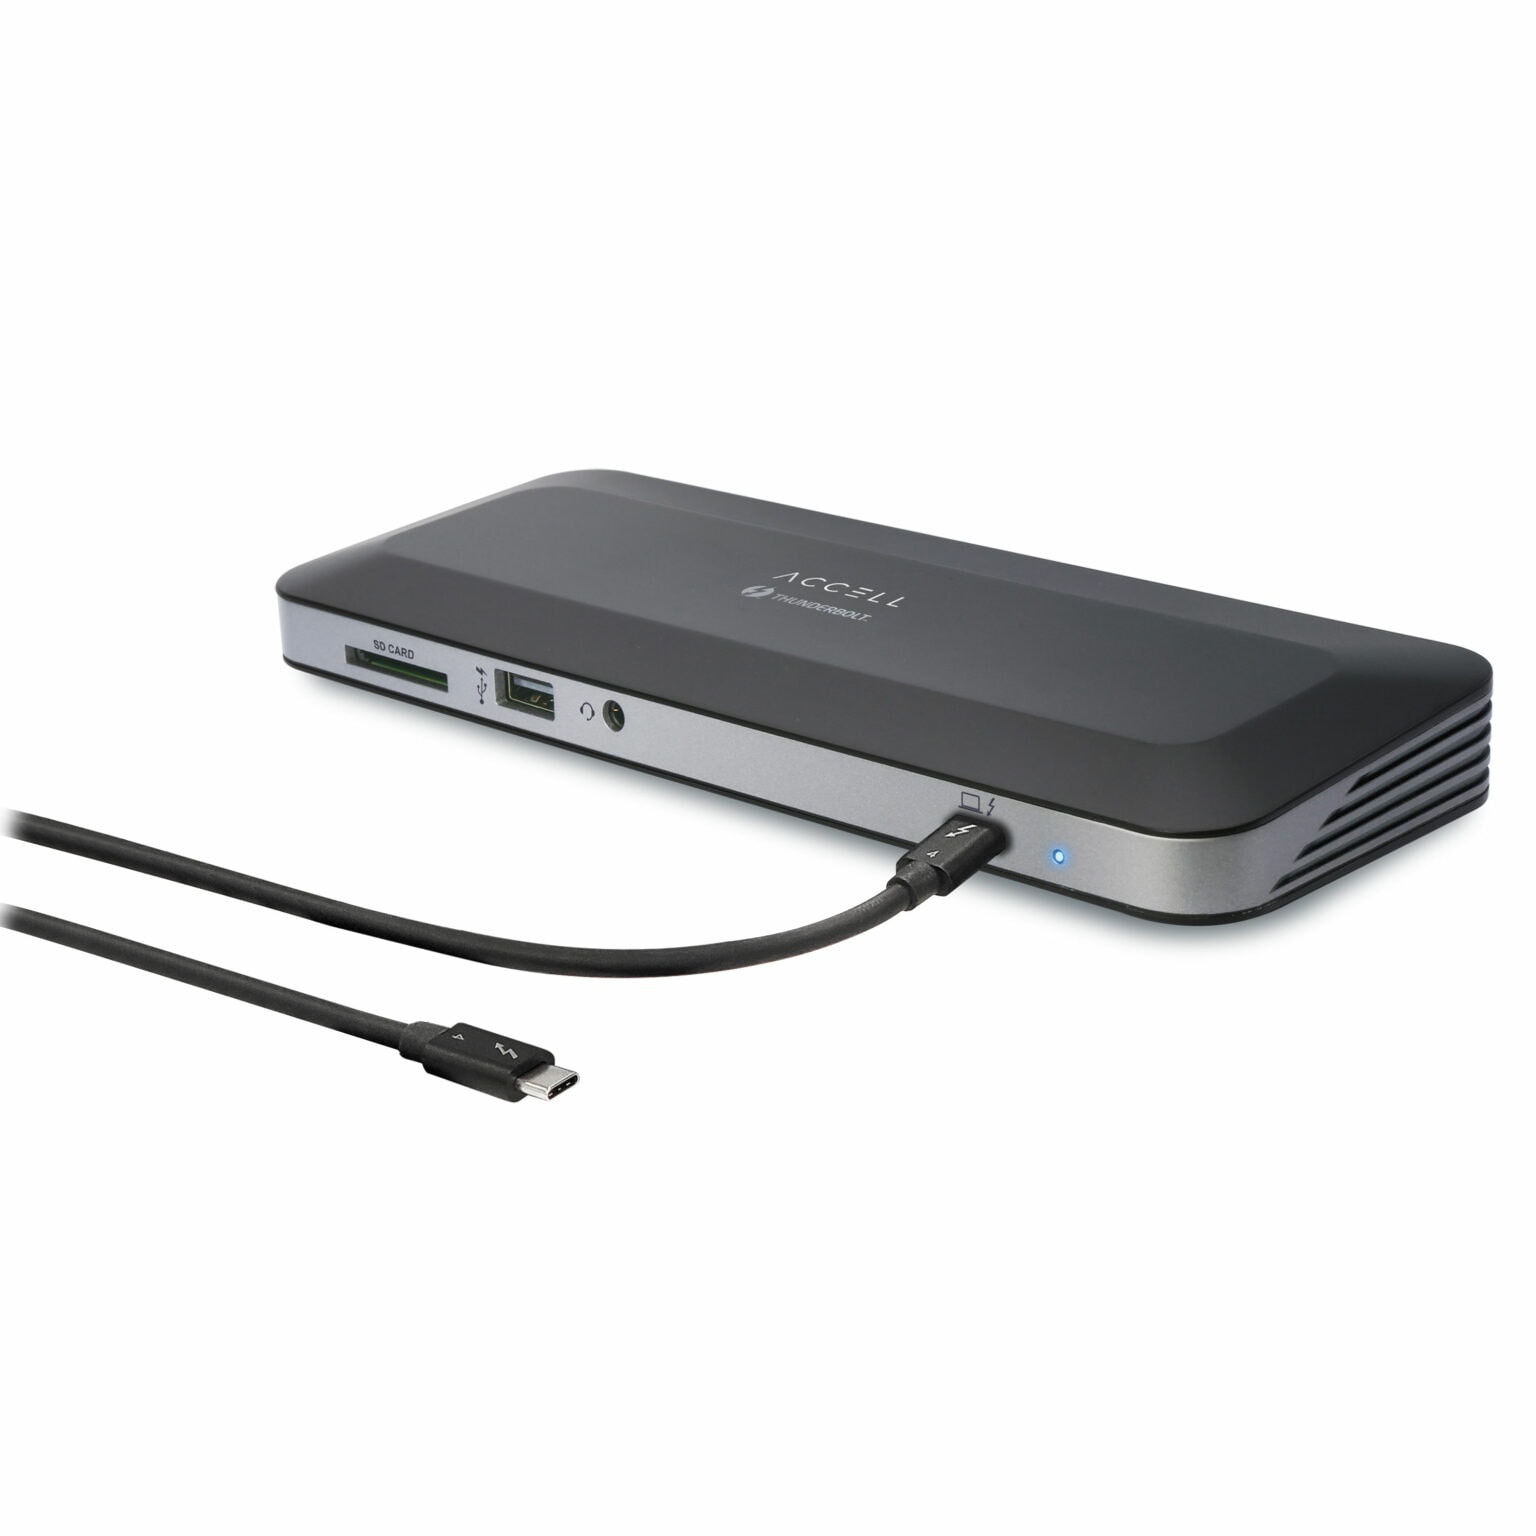 The new Access Thunderbolt 4 Docking Station expands your laptop or desktop's connectivity.